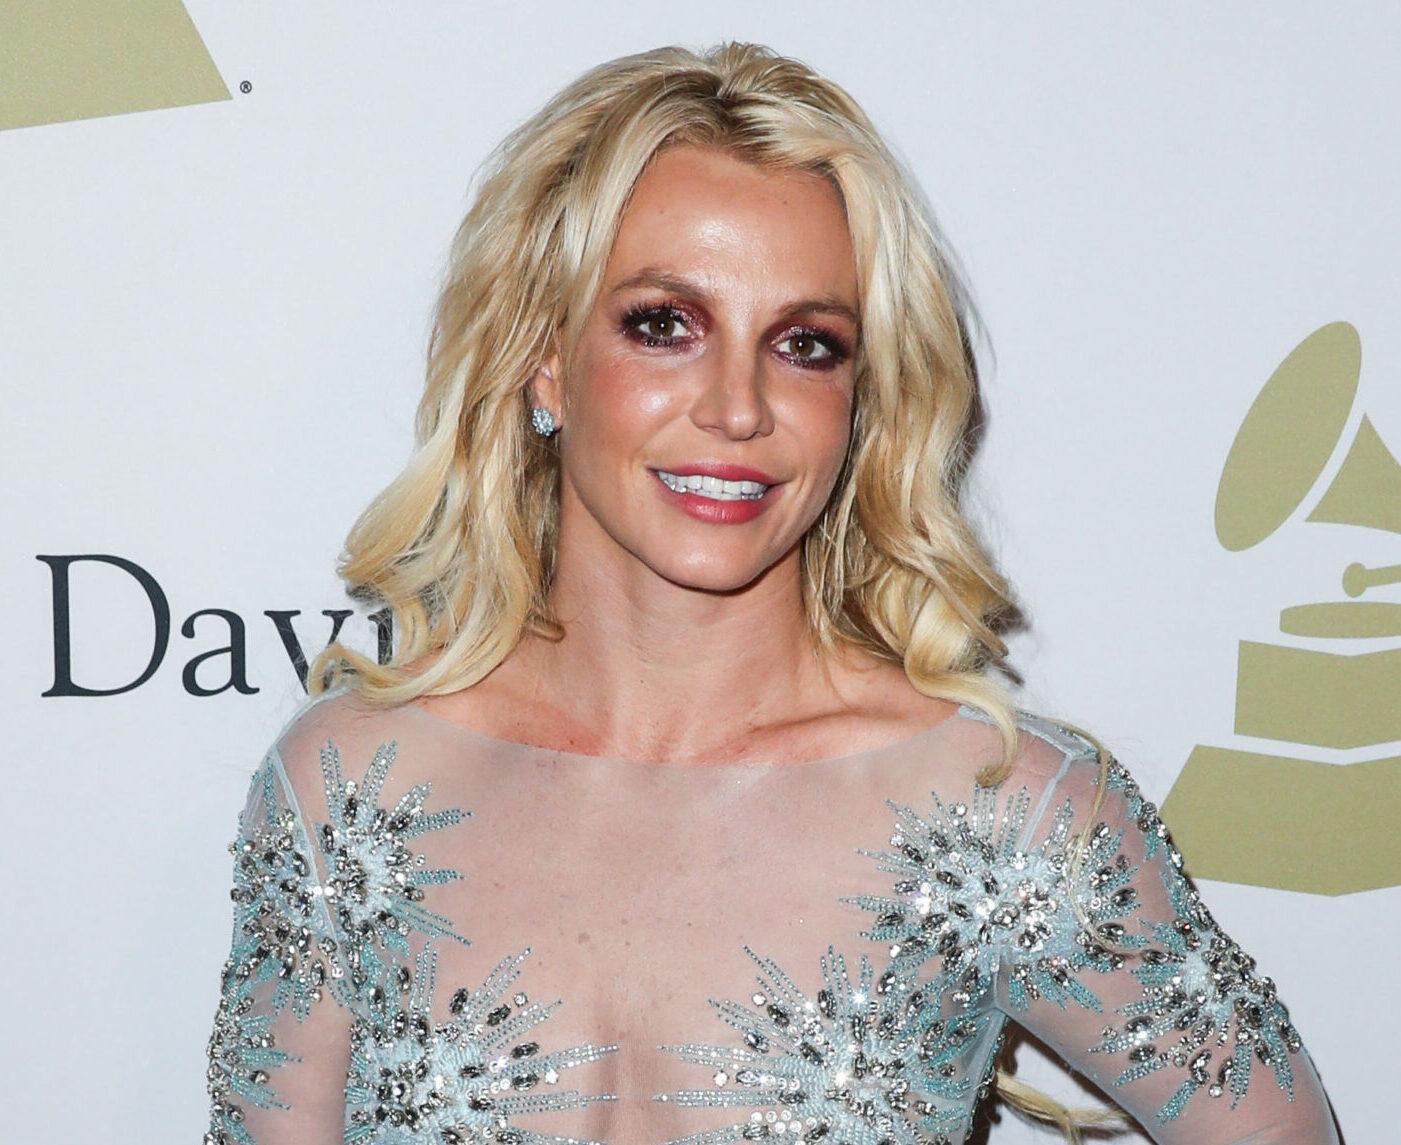 Singer Britney Spears wearing a custom Uel Camilo dress, Loriblu shoes and bag, and a Jen Hansen ring arrives at The Recording Academy And Clive Davis' 2017 Pre-GRAMMY Gala held at The Beverly Hilton Hotel on February 11, 2017 in Beverly Hills, Los Angeles, California, United States.